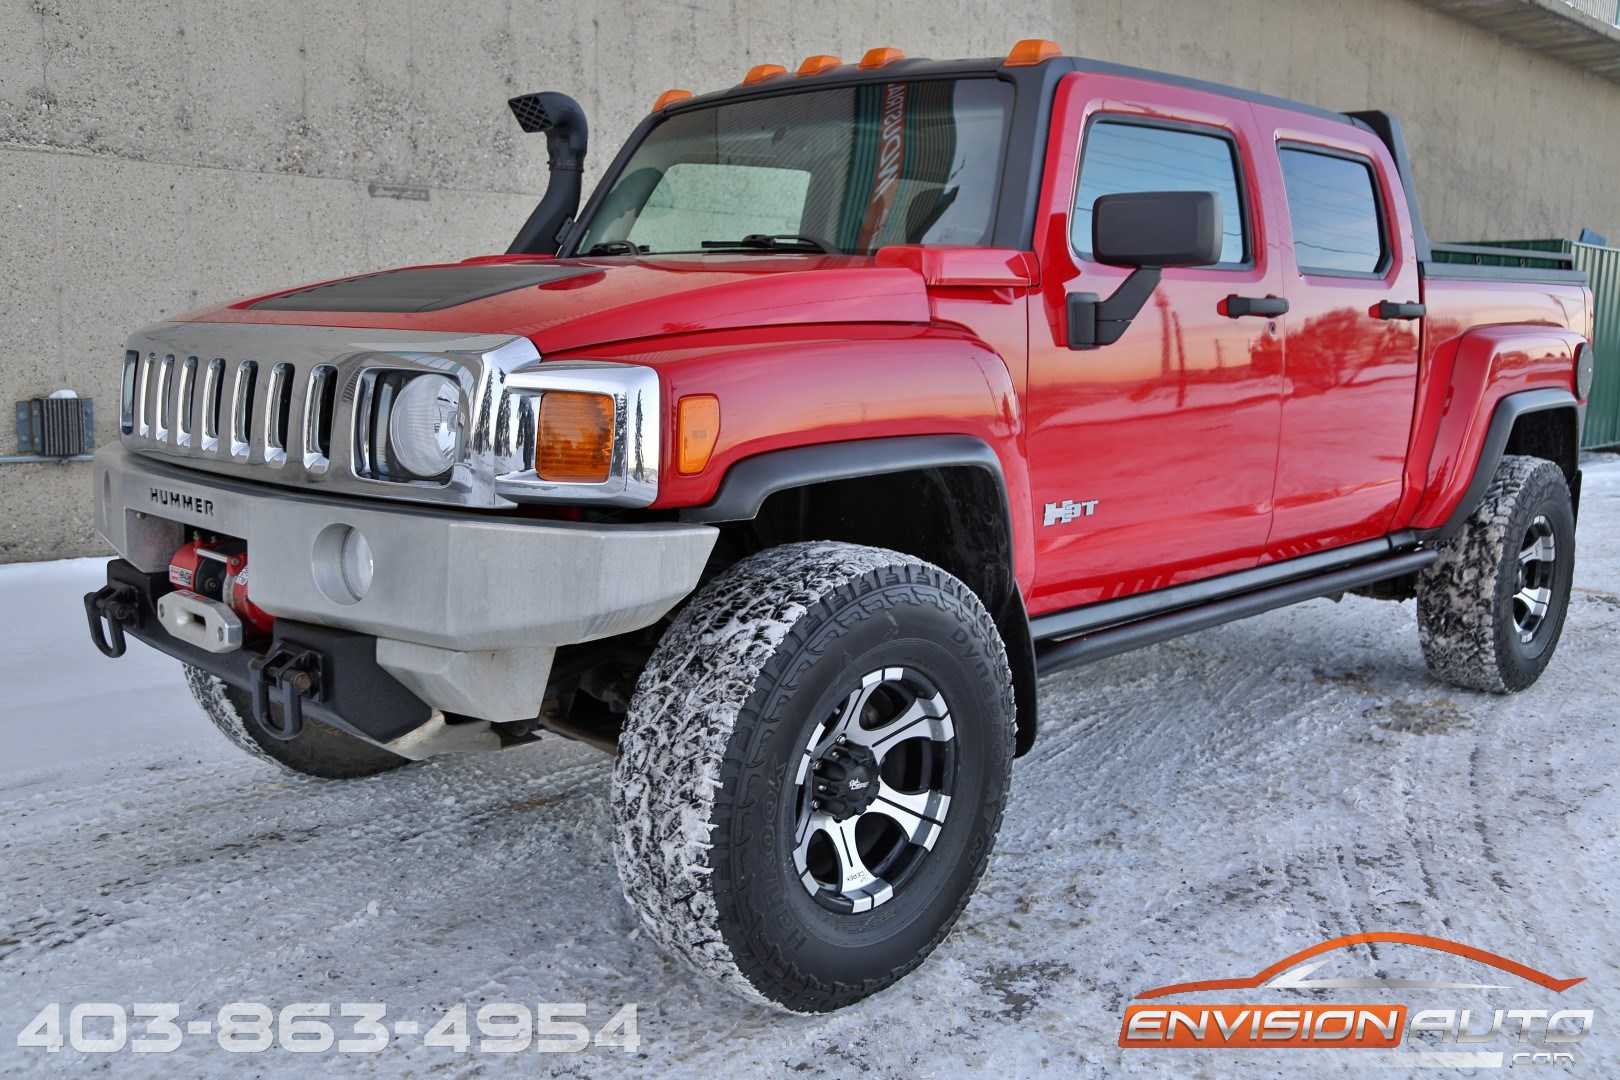 2010 H3T Hummer Truck Offroad Pkg 4×4 – Final Year Produced! - Envision Auto